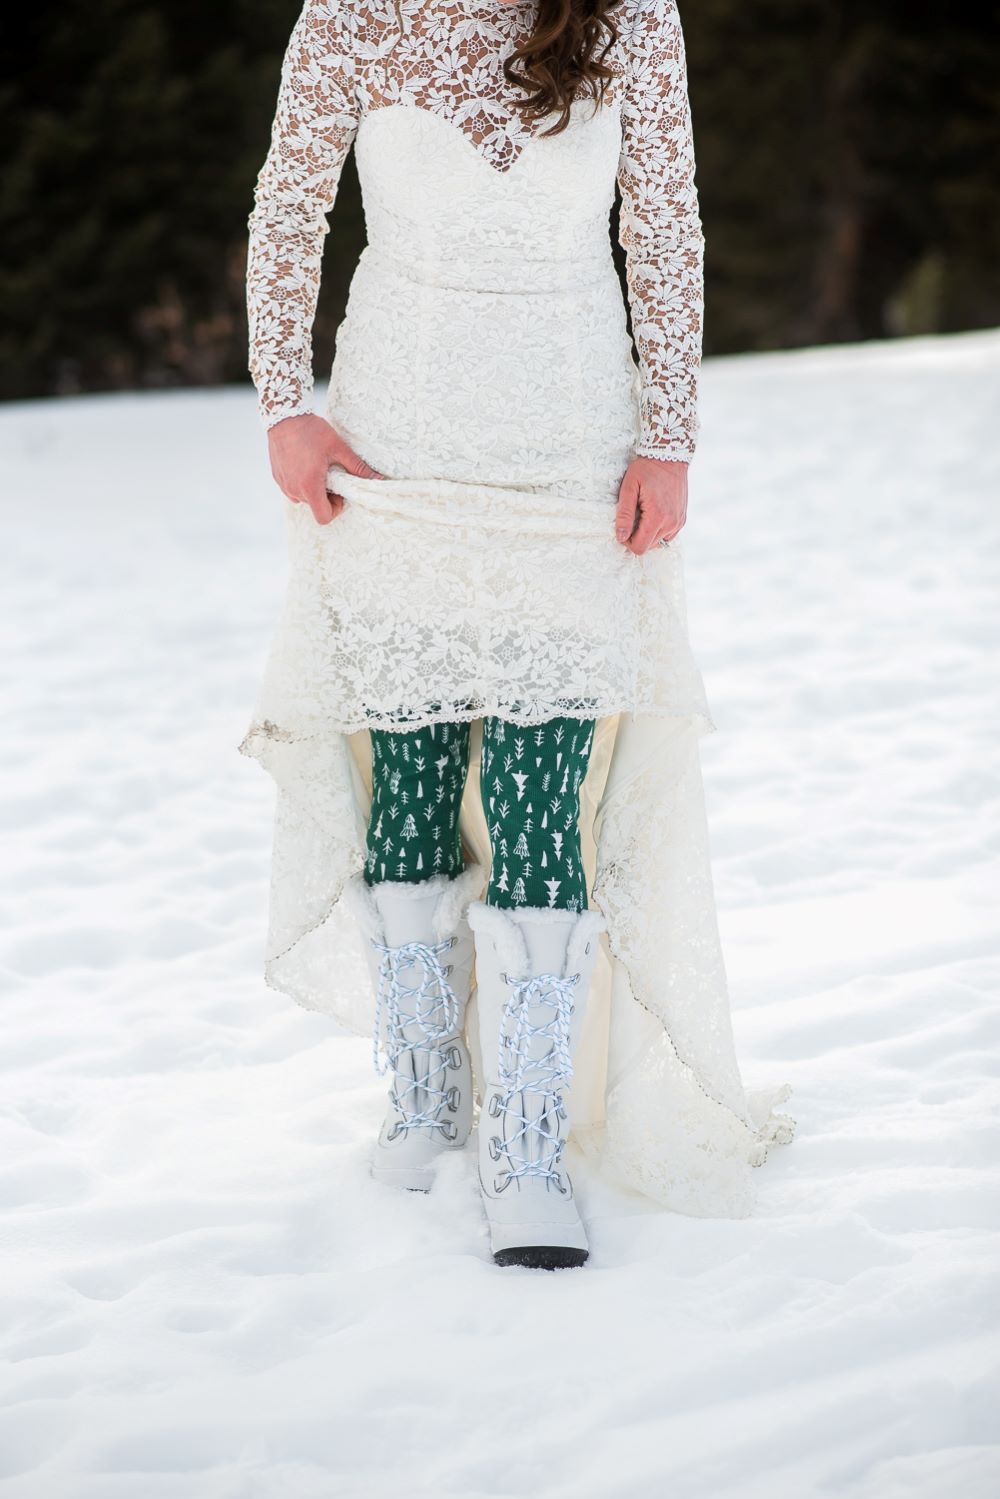 white wedding boots and green tights